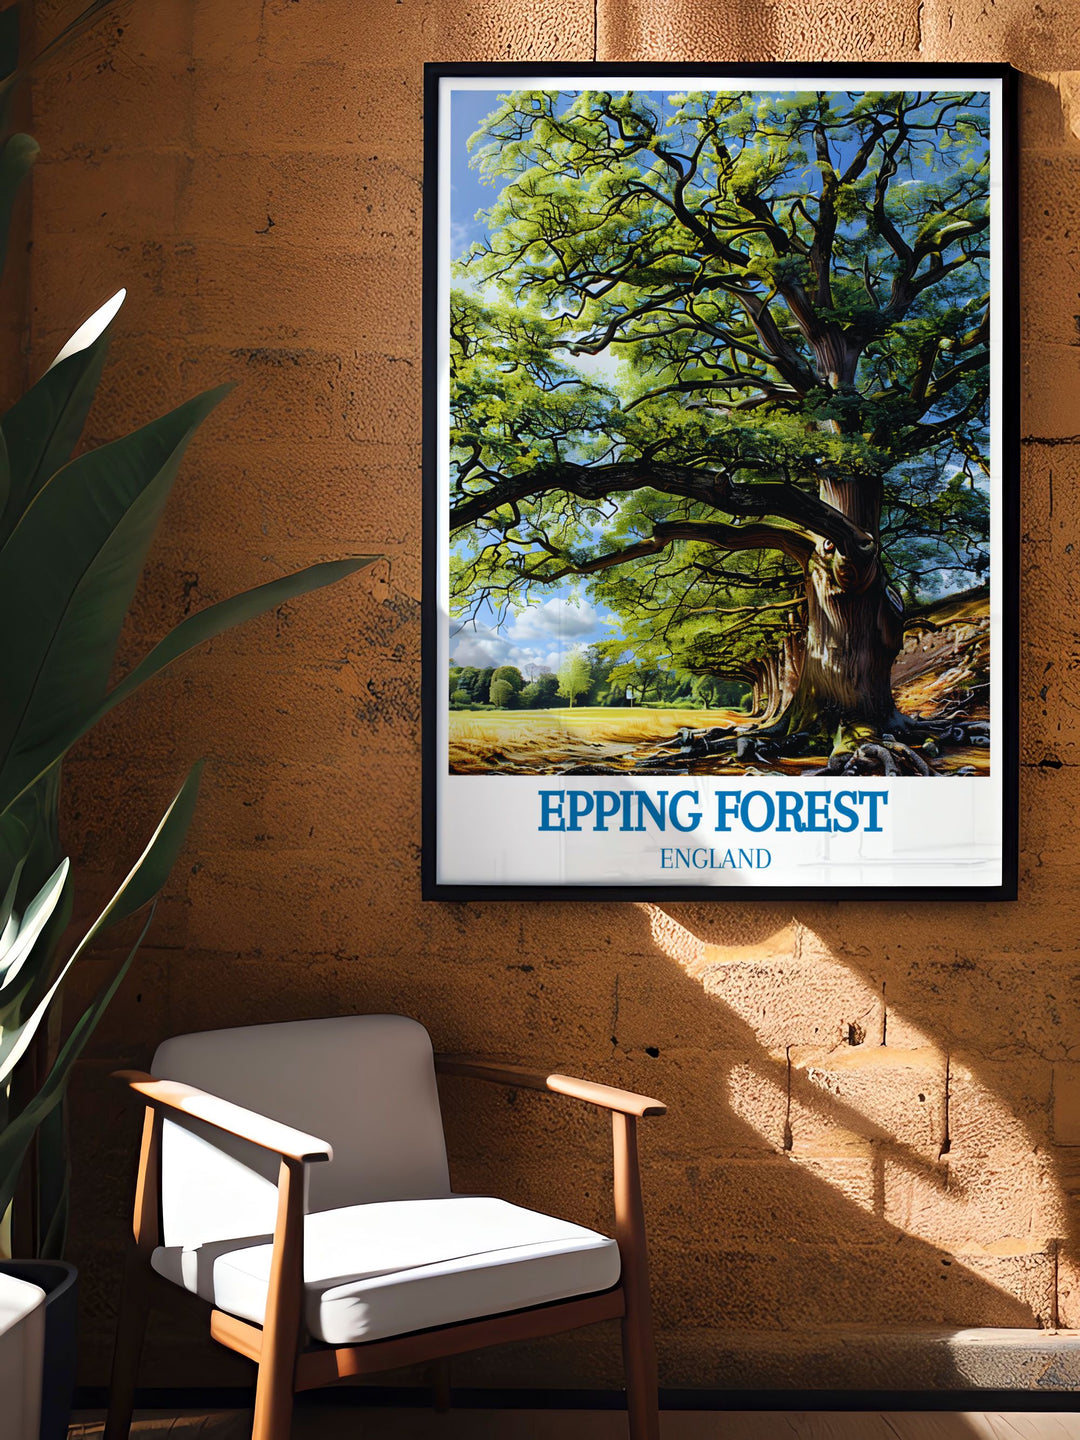 Framed art capturing the majestic ancient oaks of Epping Forest, reflecting the natural beauty and heritage of this iconic location.